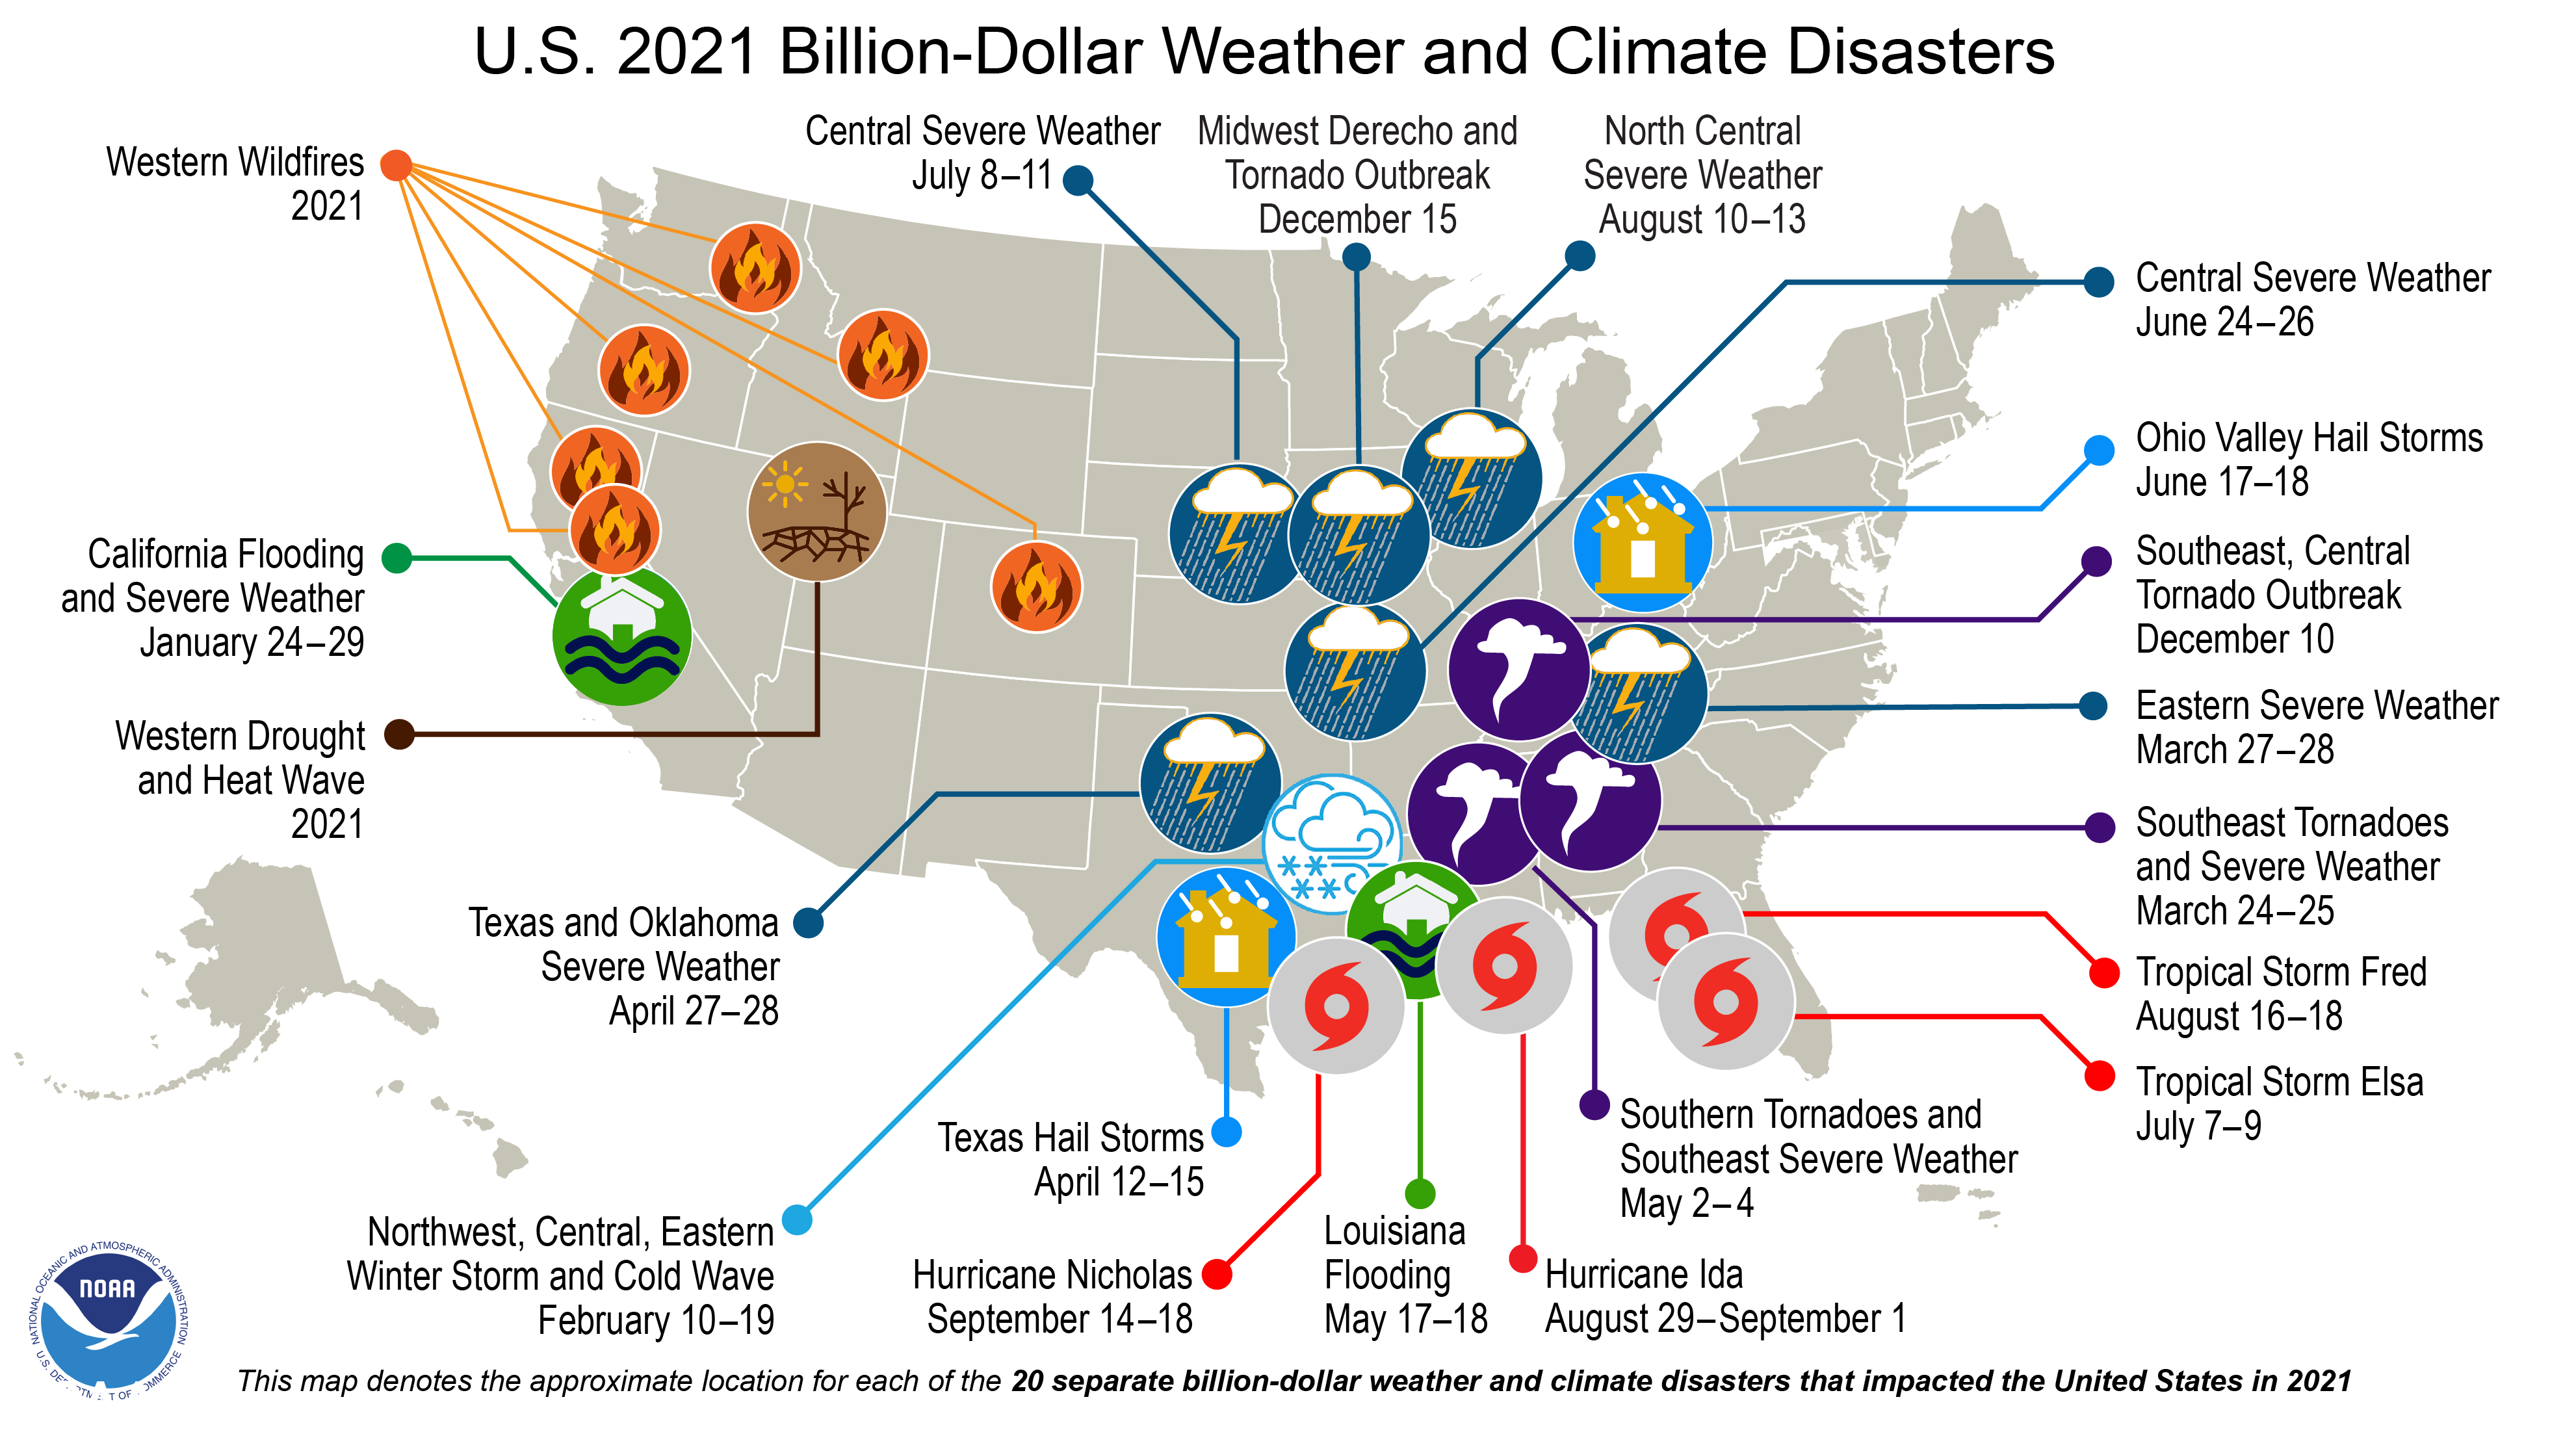 America’s billion-dollar climate disasters of 2021